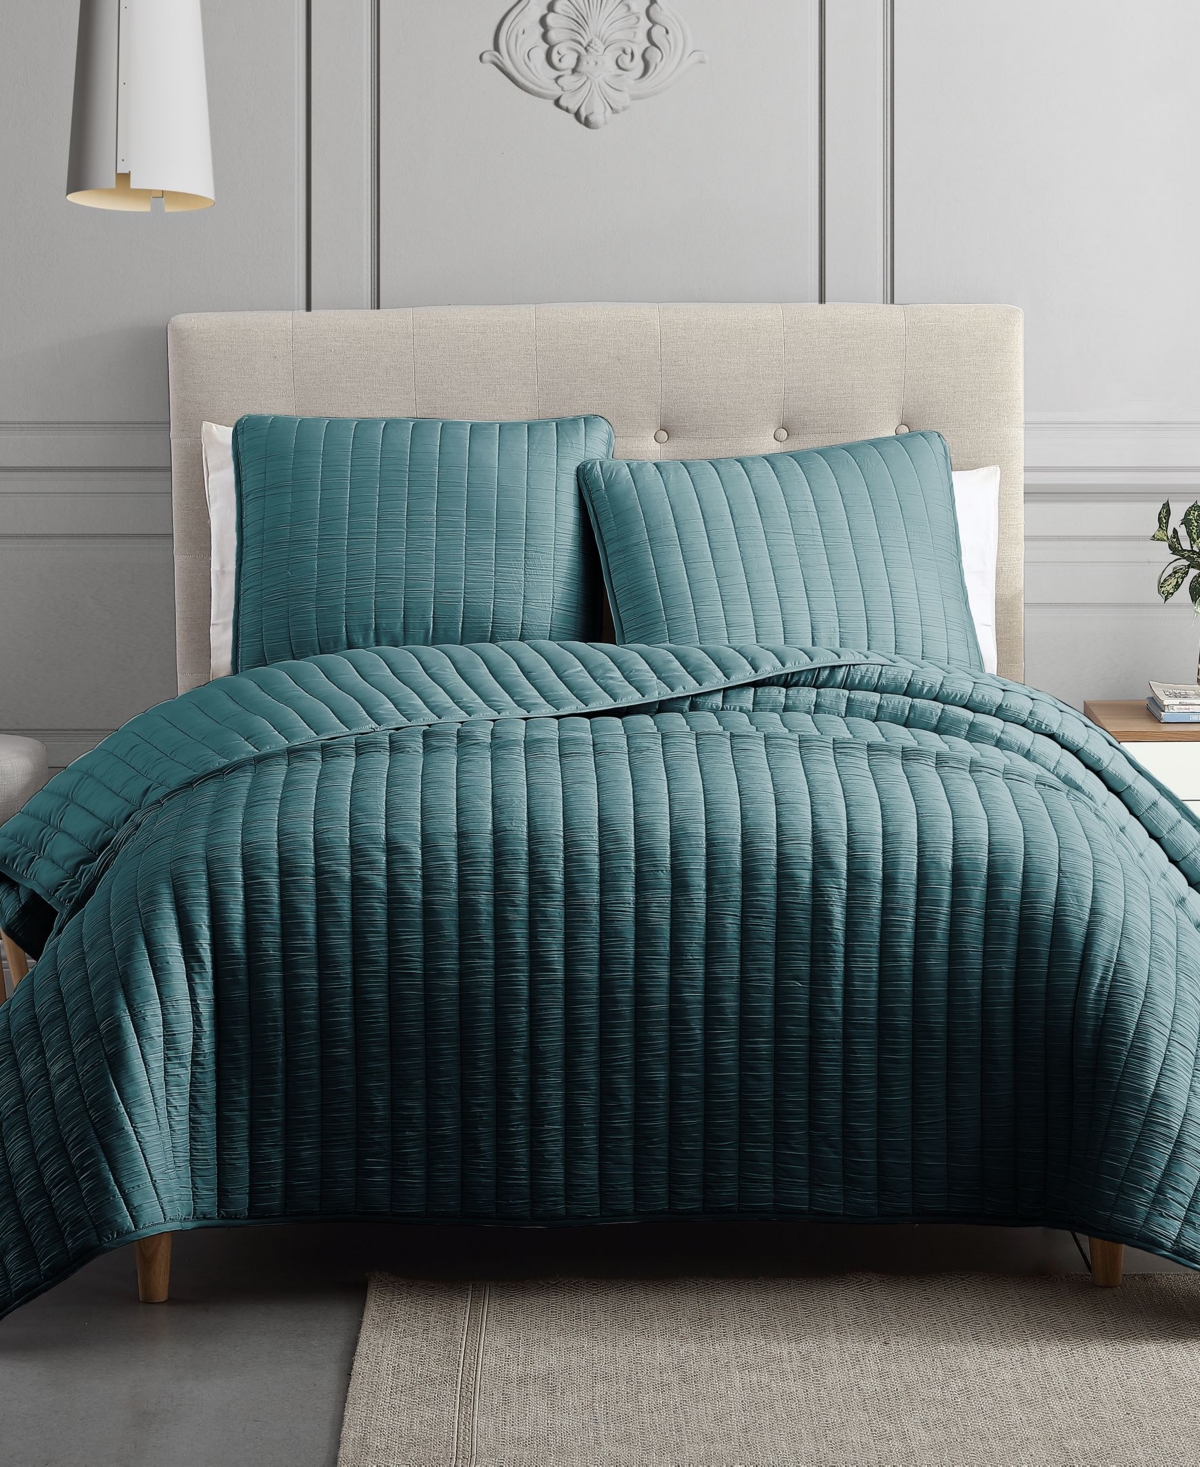 Riverbrook Home Moonstone 3 Piece Full/queen Coverlet Set In Teal